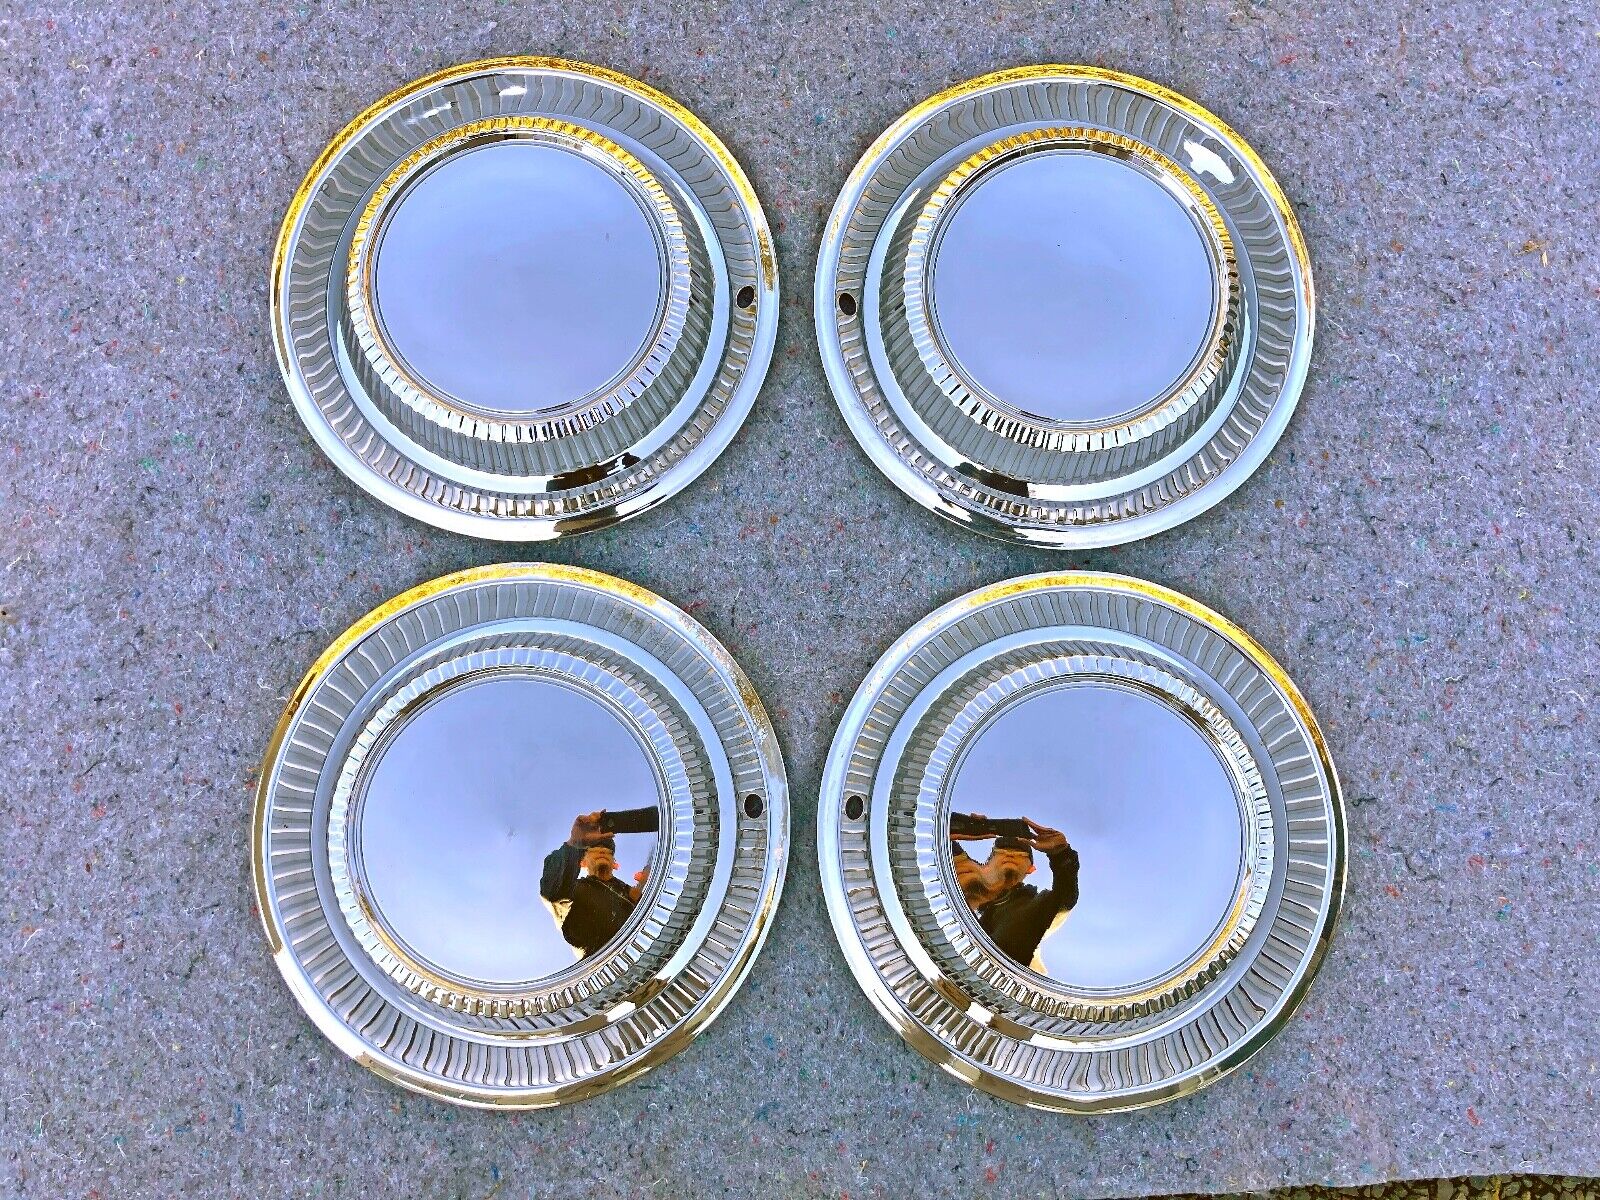 1960 Plymouth Fury Wheel Cover Hub Caps - Polished - Set of 4 - No Reserve & FS